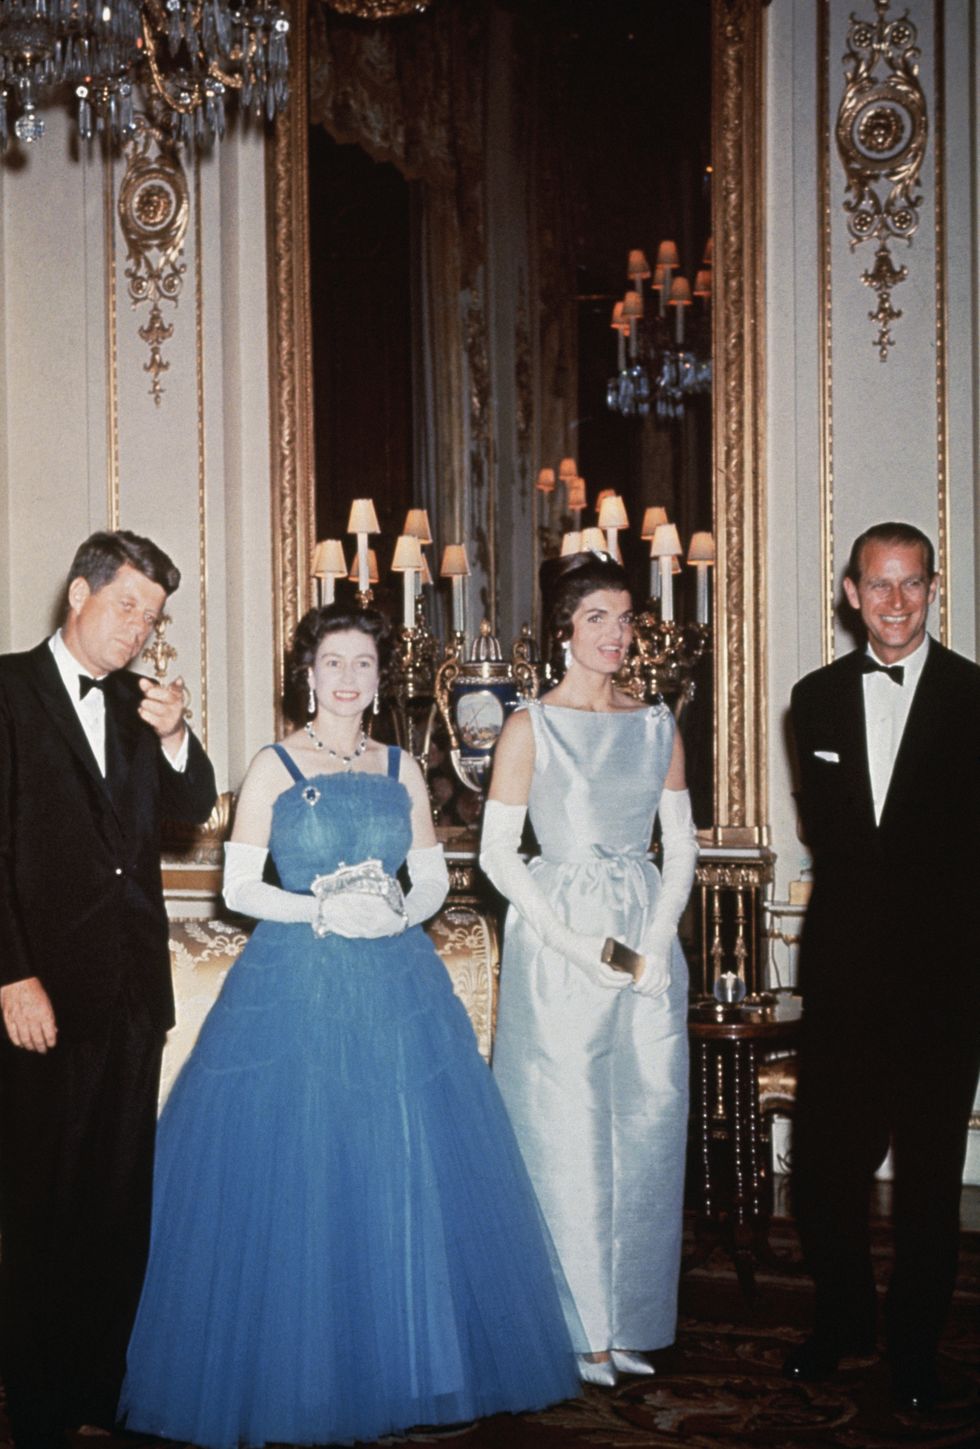 president john f kennedy and first lady jackie kennedy pay a visit to the royal family in england l r john f kennedy queen elizabeth ii jackie kennedy, and prince philip